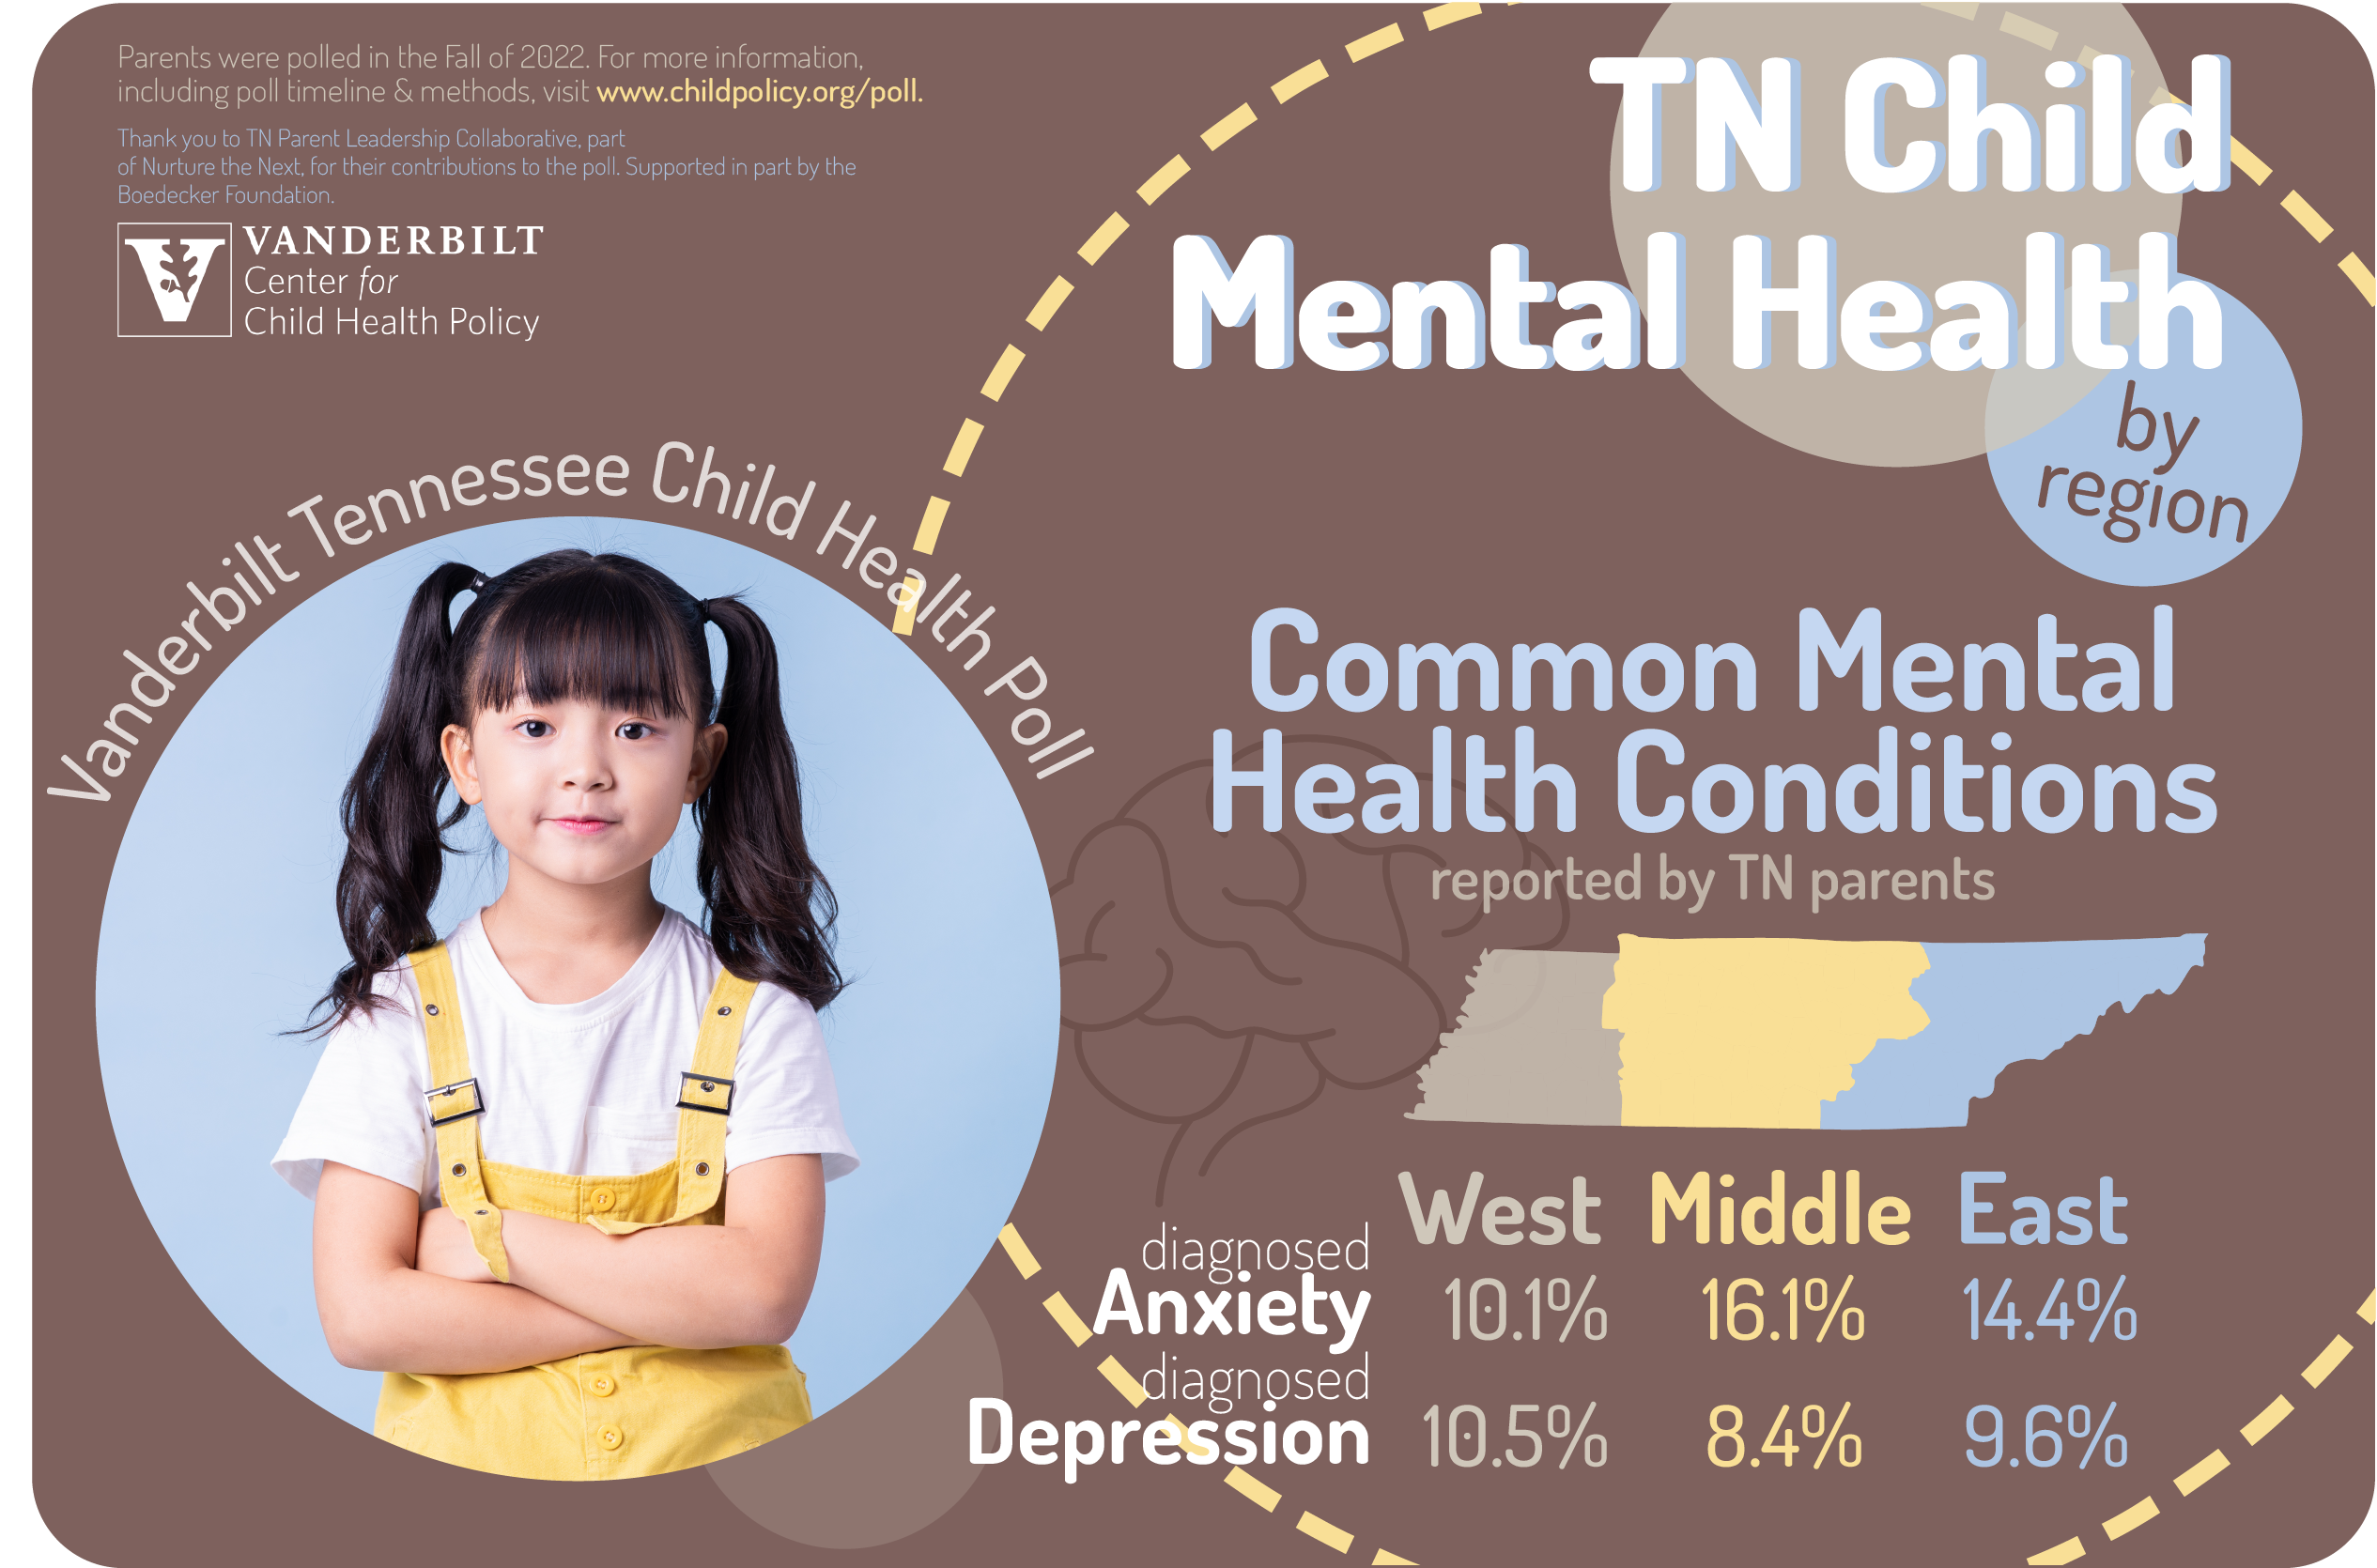 Child Mental Health by region Infographic